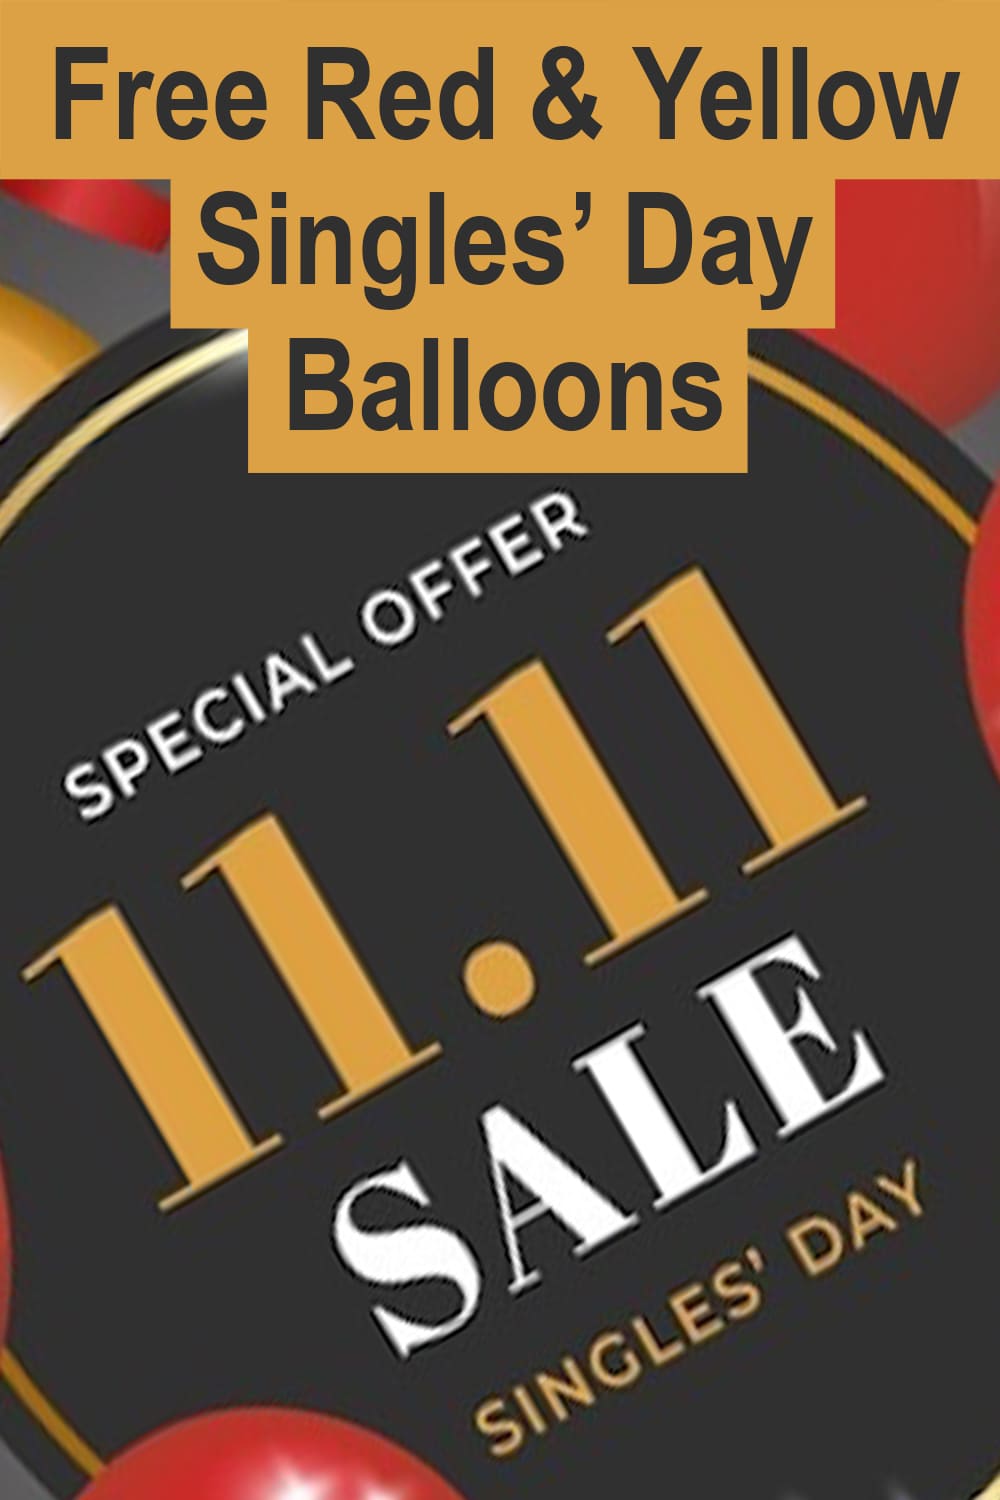 Free Red and Yellow Singles' Day Balloons.